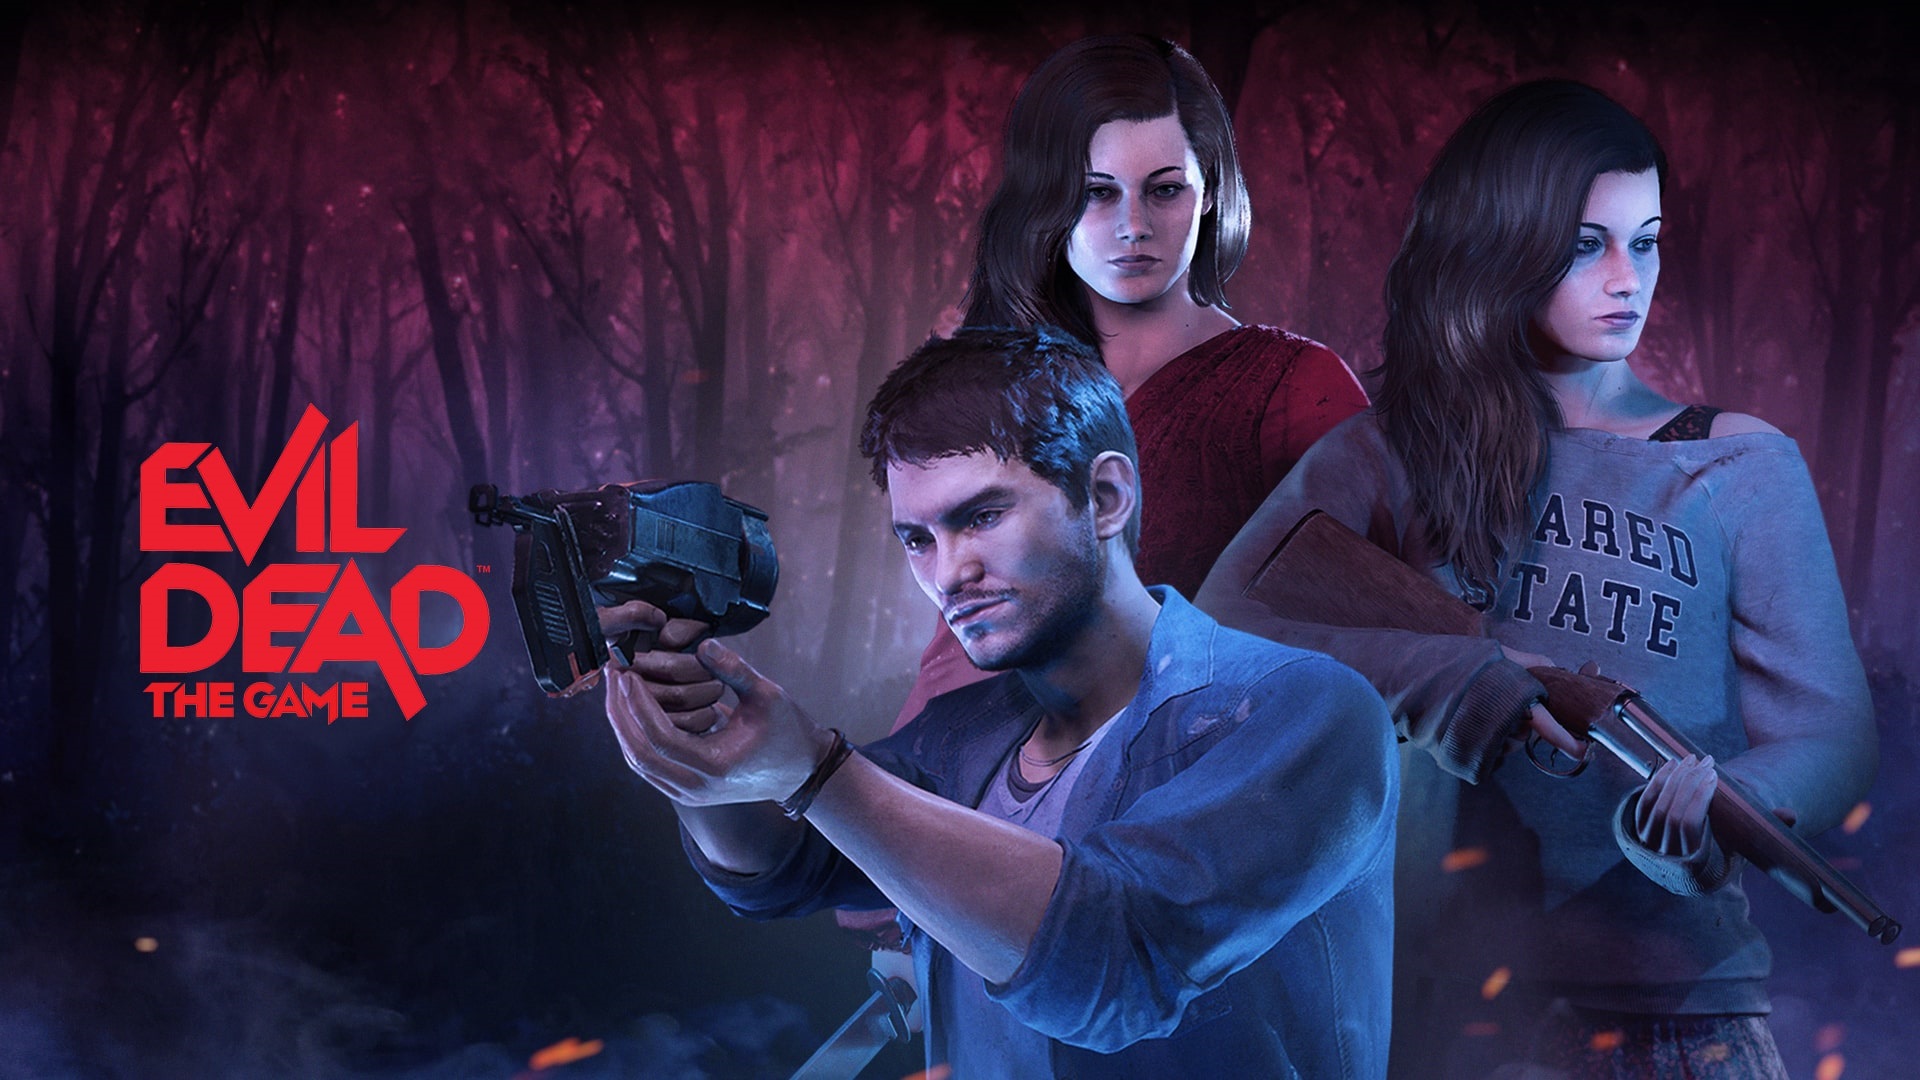 EvilDeadTheGame on X: Let it rain blood! The Evil Dead 2013 Update is now  live for Evil Dead: The Game. Play as Mia and David from Evil Dead 2013, a  new single-player